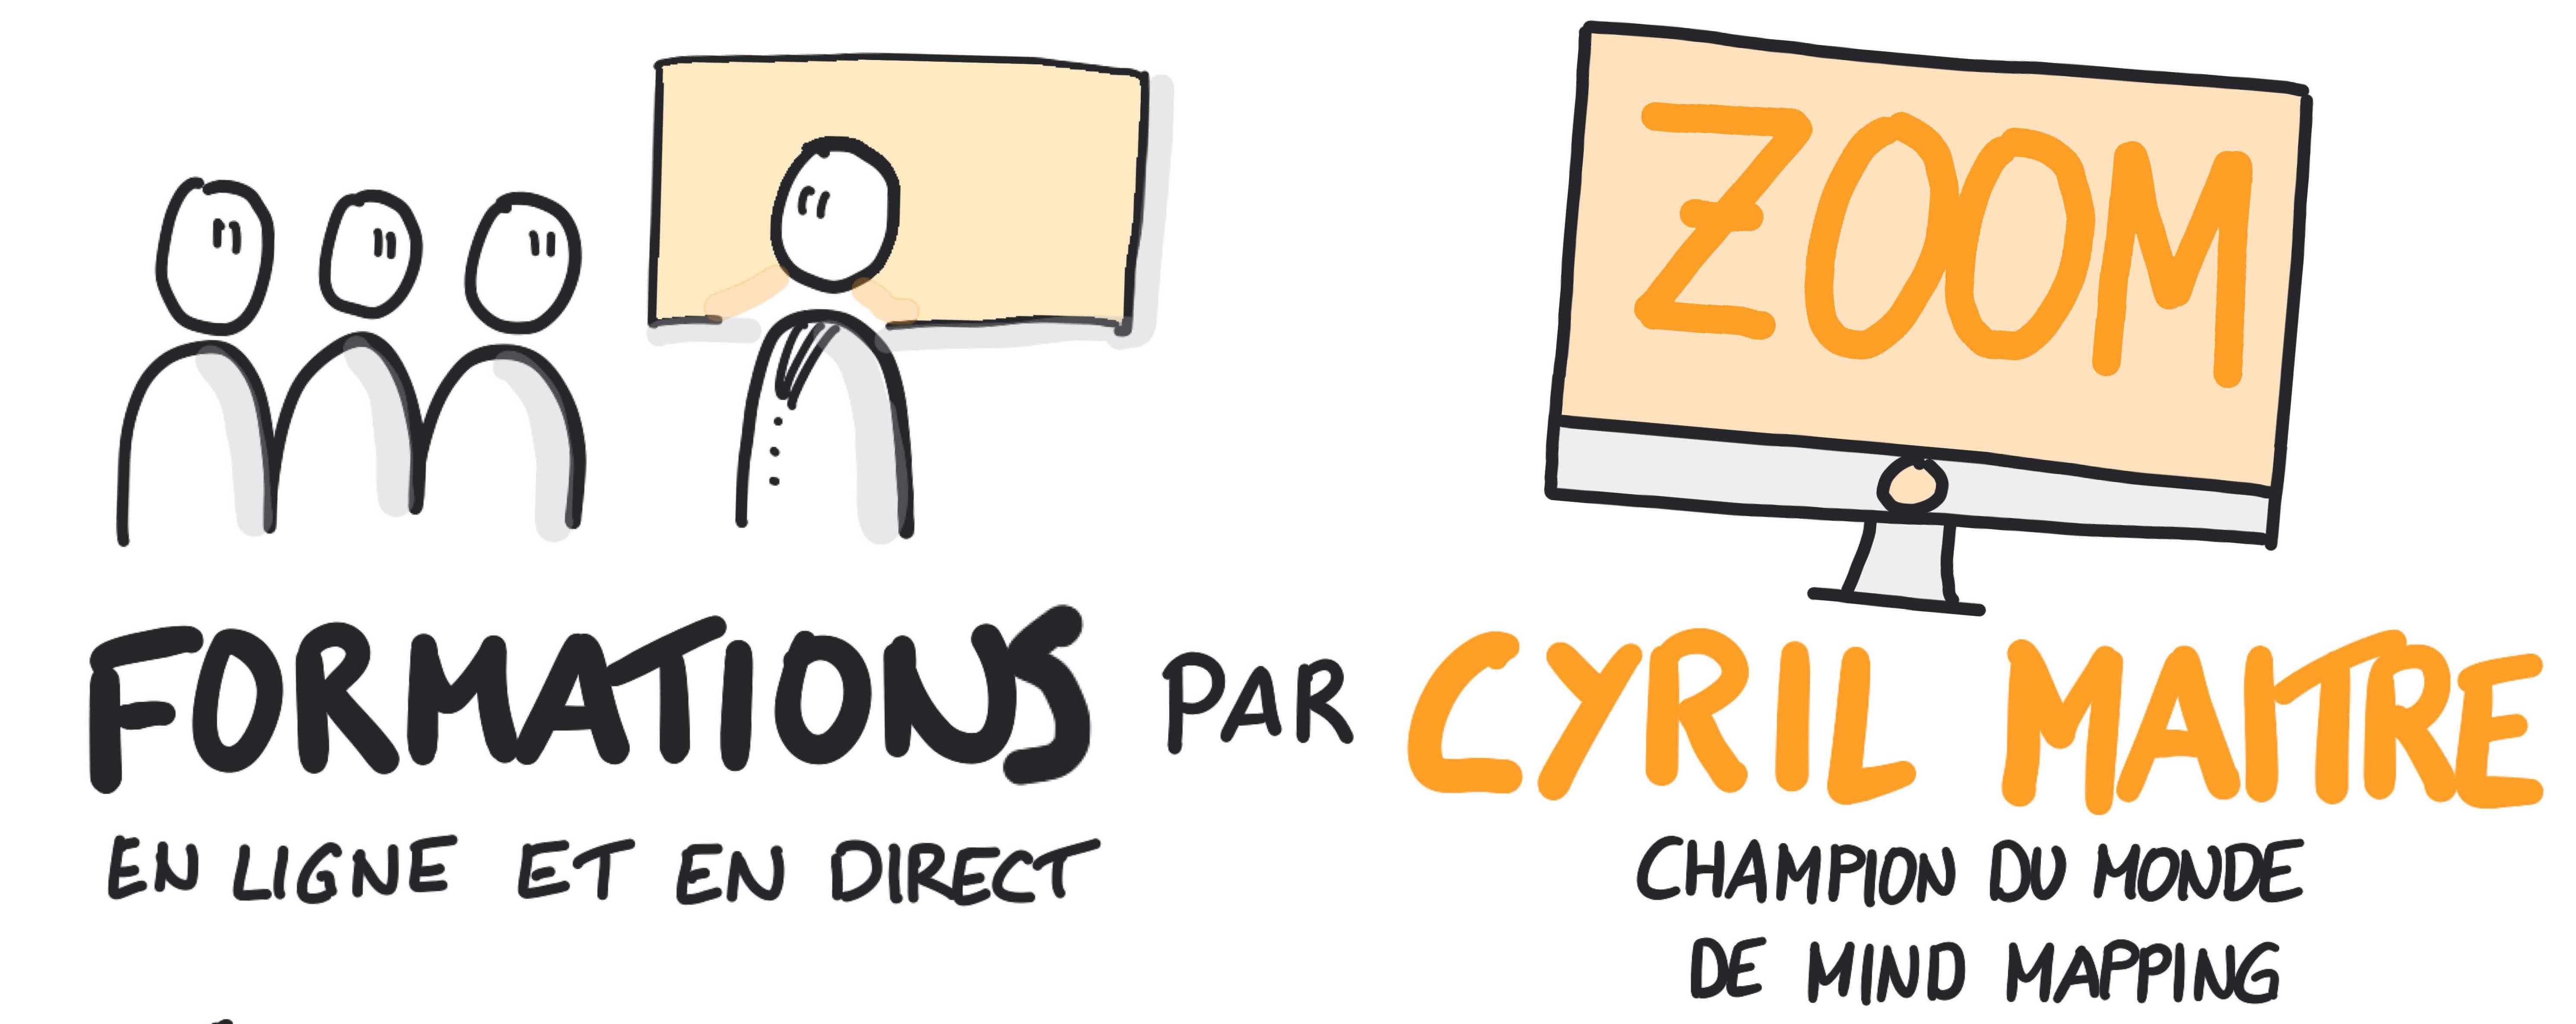 Les formations Zoom